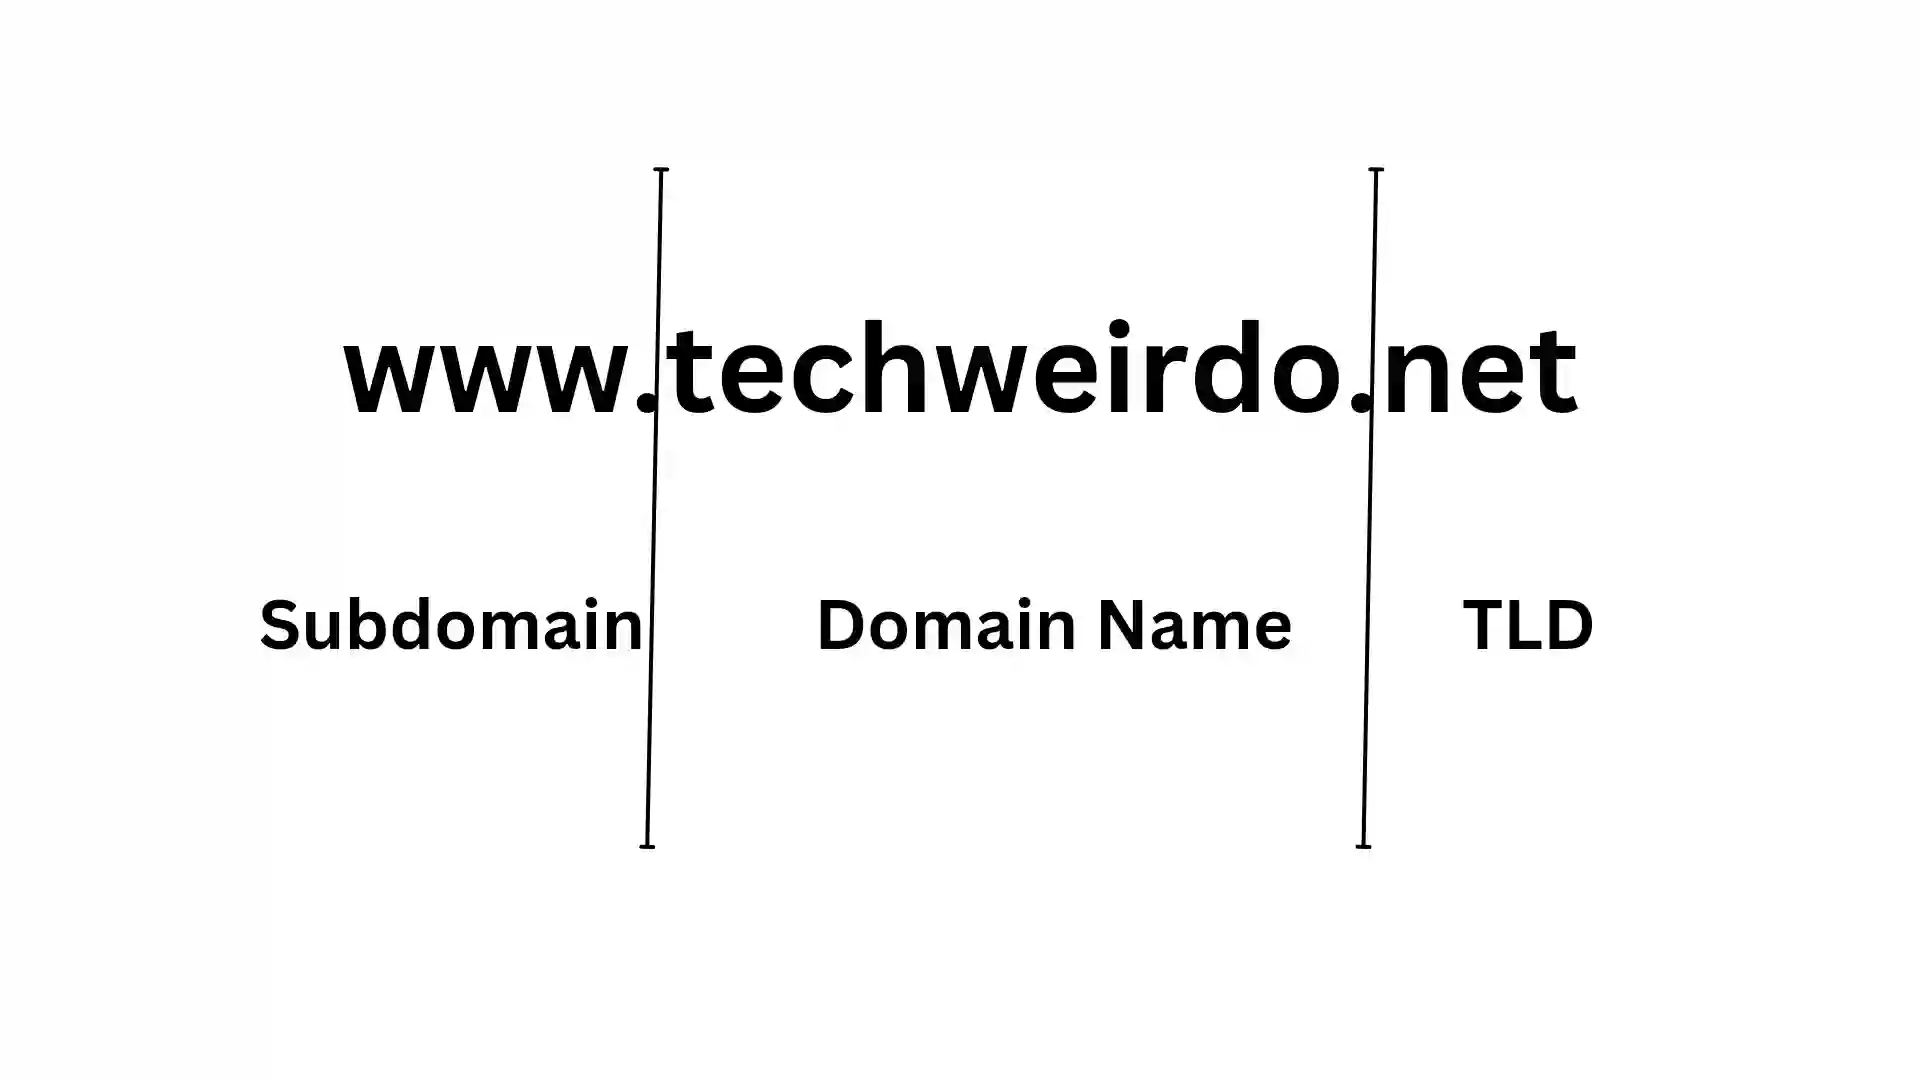 Domain name structure